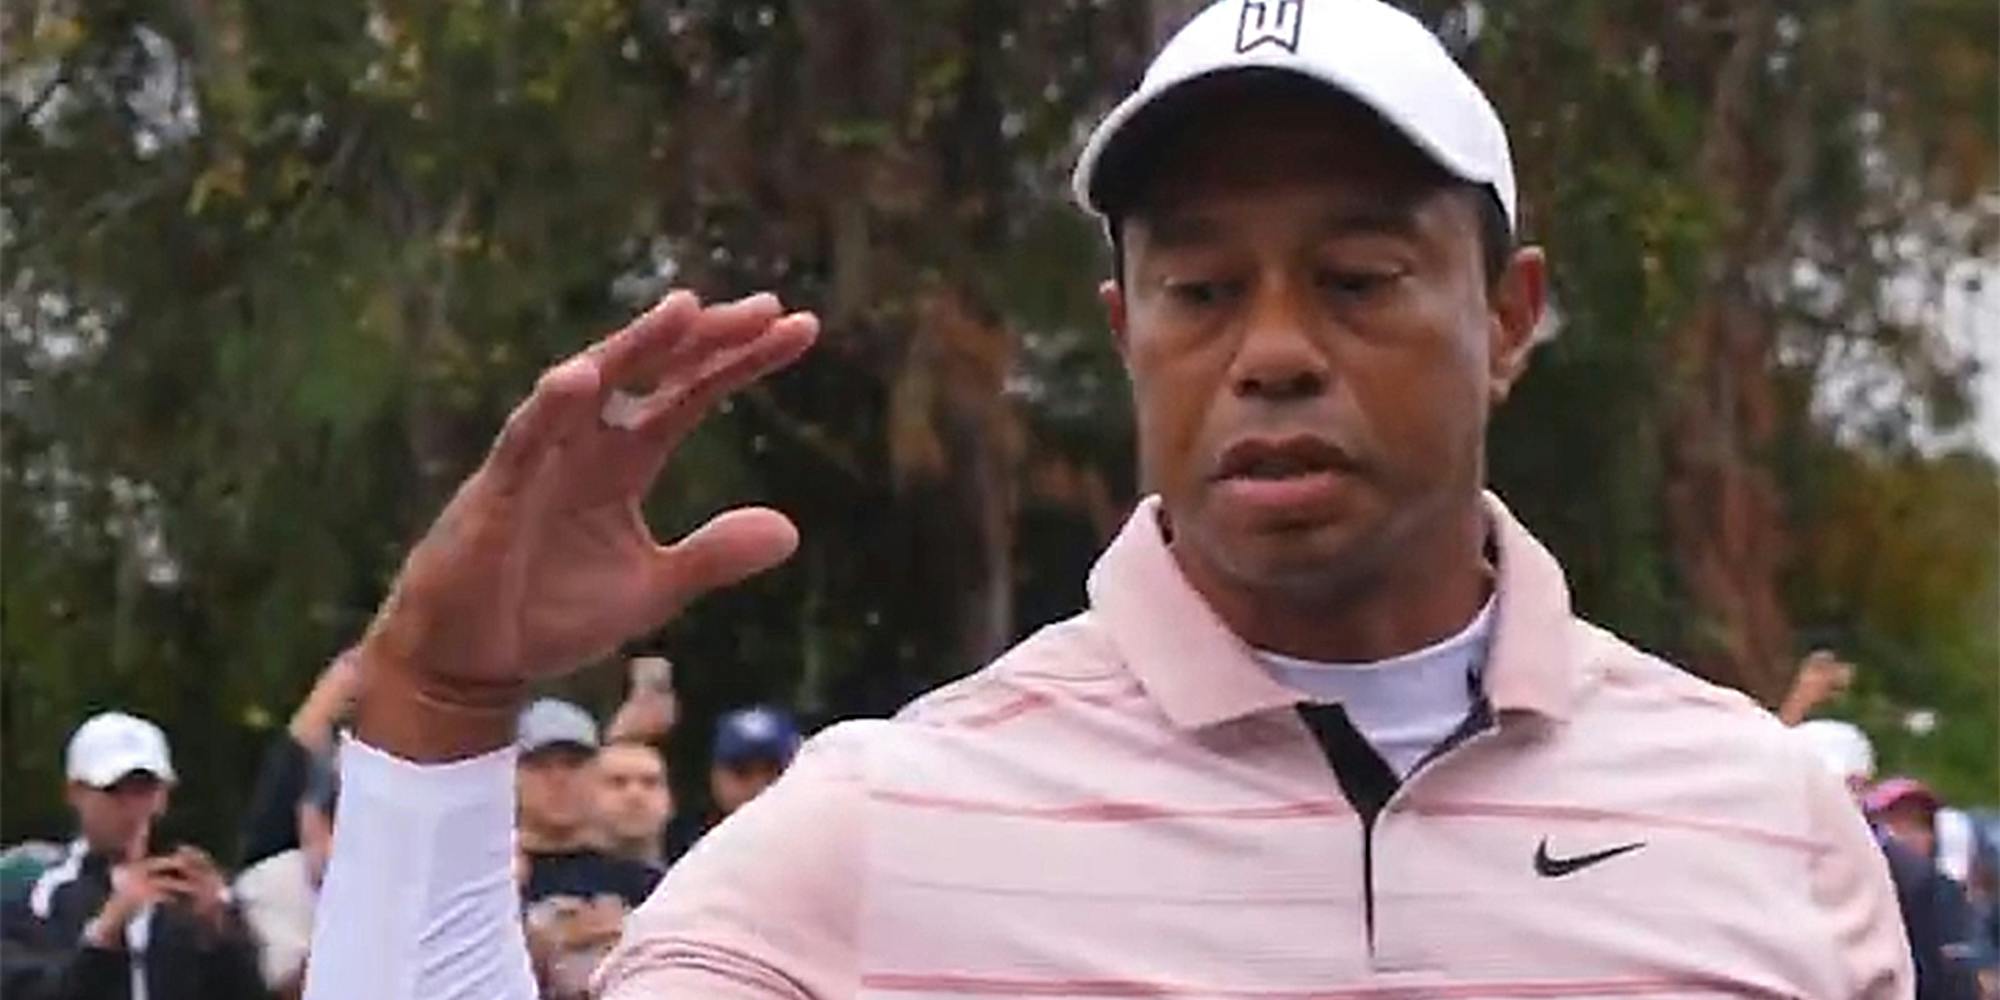 tiger woods saying "big dog" while giving a high-five